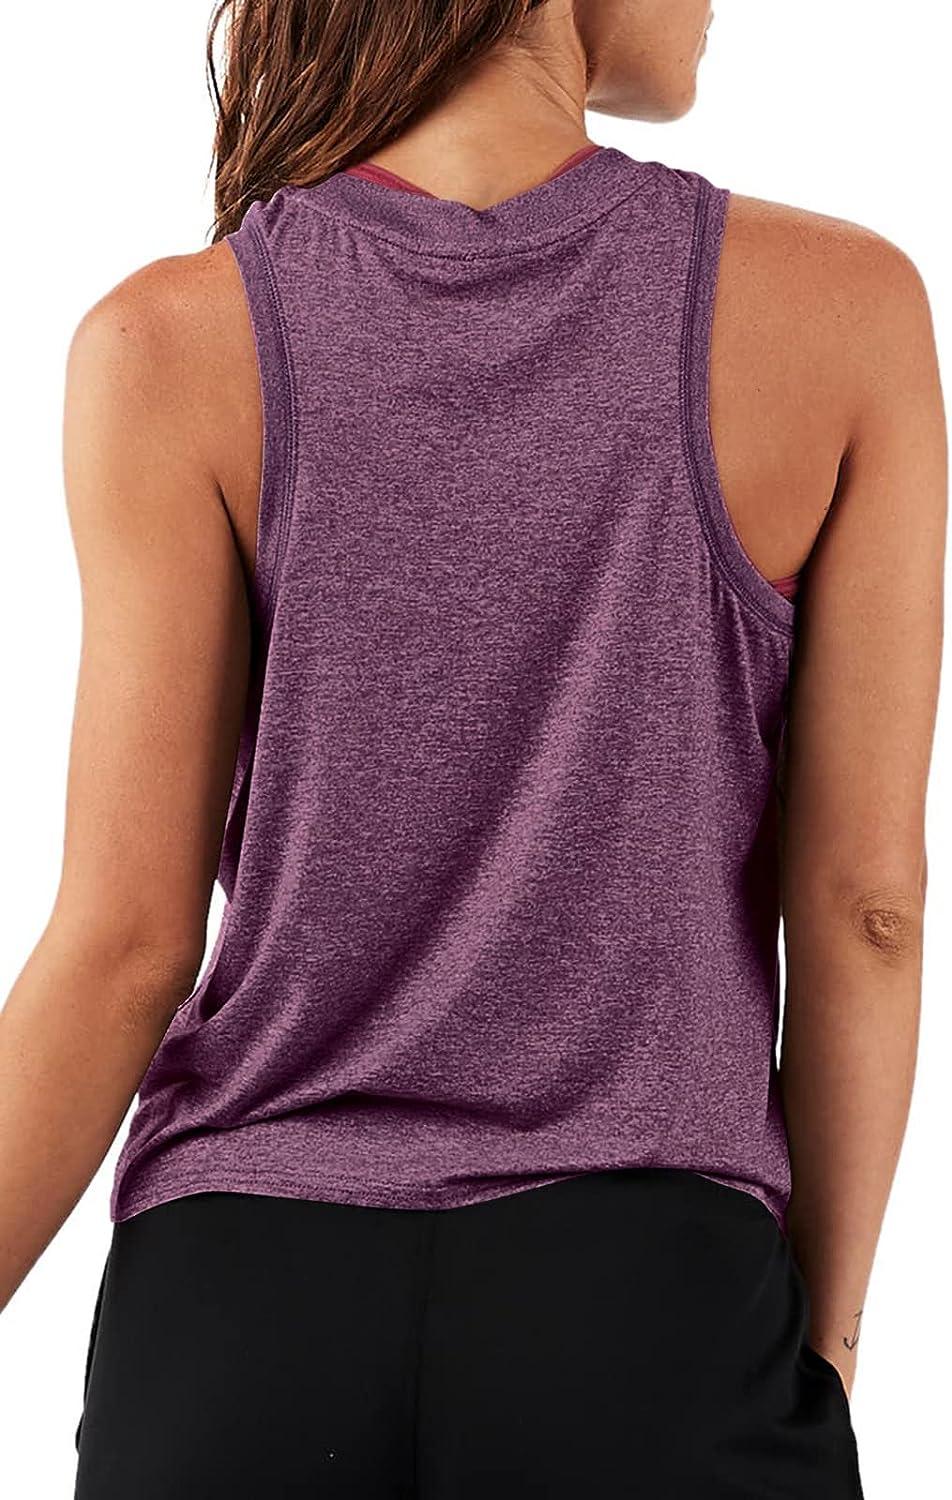 LASLULU Women's Sexy Sleeveless Square Neck Fitted Ribbed Gym